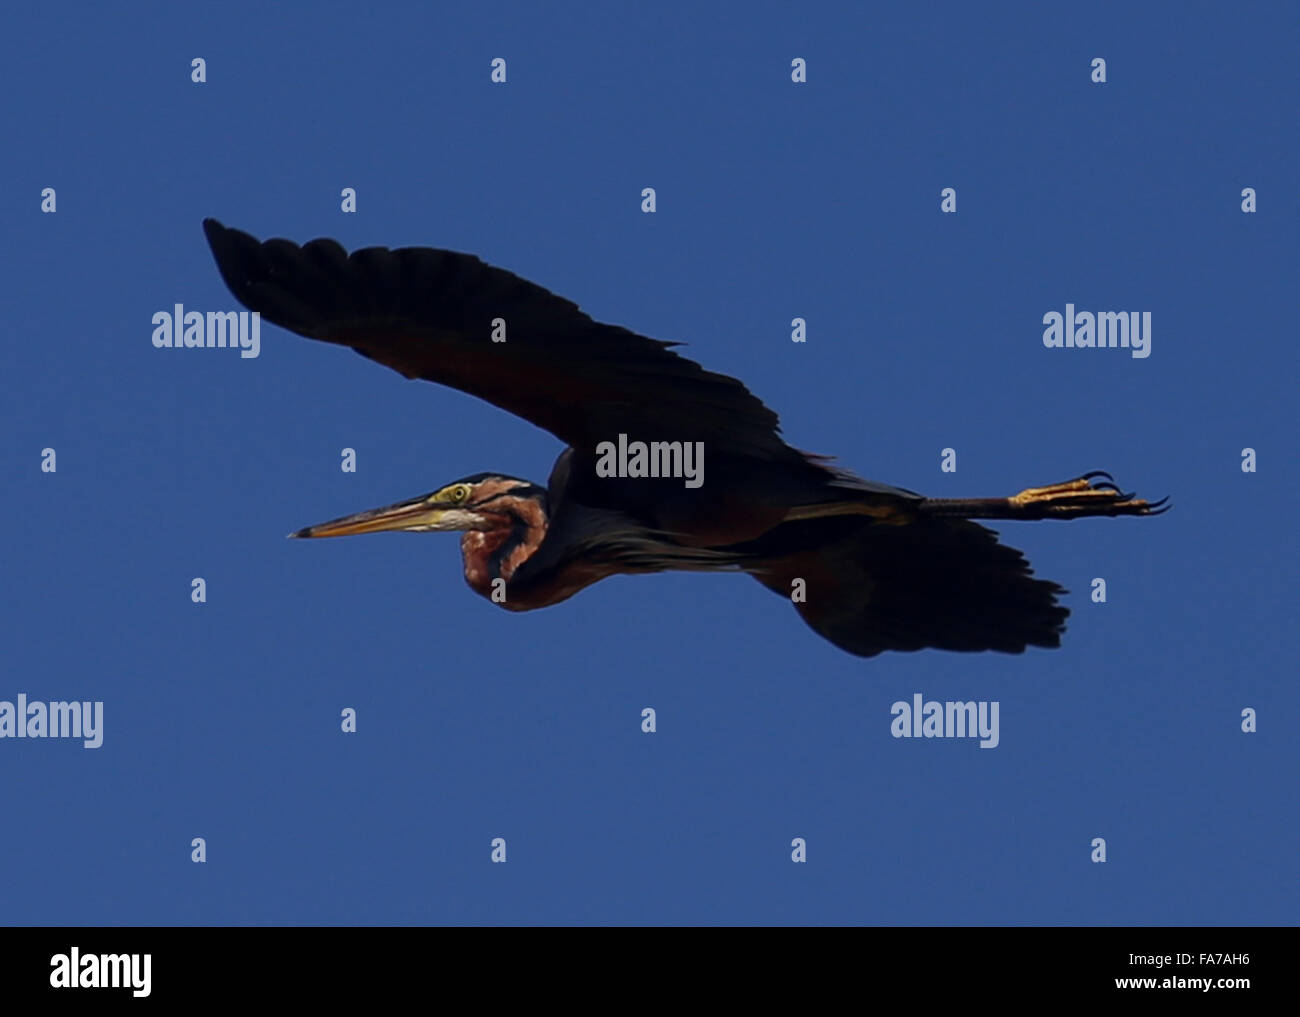 Bago. 23rd Dec, 2015. Photo taken on Dec. 23, 2015 shows a purple heron flying over Moeyungyi Wetland Wildlife Sanctuary in Bago region, Myanmar. Moeyungyi Wetlands is situated in Bago Division. Every year, millions of birds usually fly from the northern hemisphere to the south along the East-Asian Australian Flyway to escape from winter. They stop to rest and feed in Asia. So the flyway contains a network of wetlands and Moeyungyi is one of which could cooperate to certain migrated as well as domestic birds. Credit:  U Aung/Xinhua/Alamy Live News Stock Photo